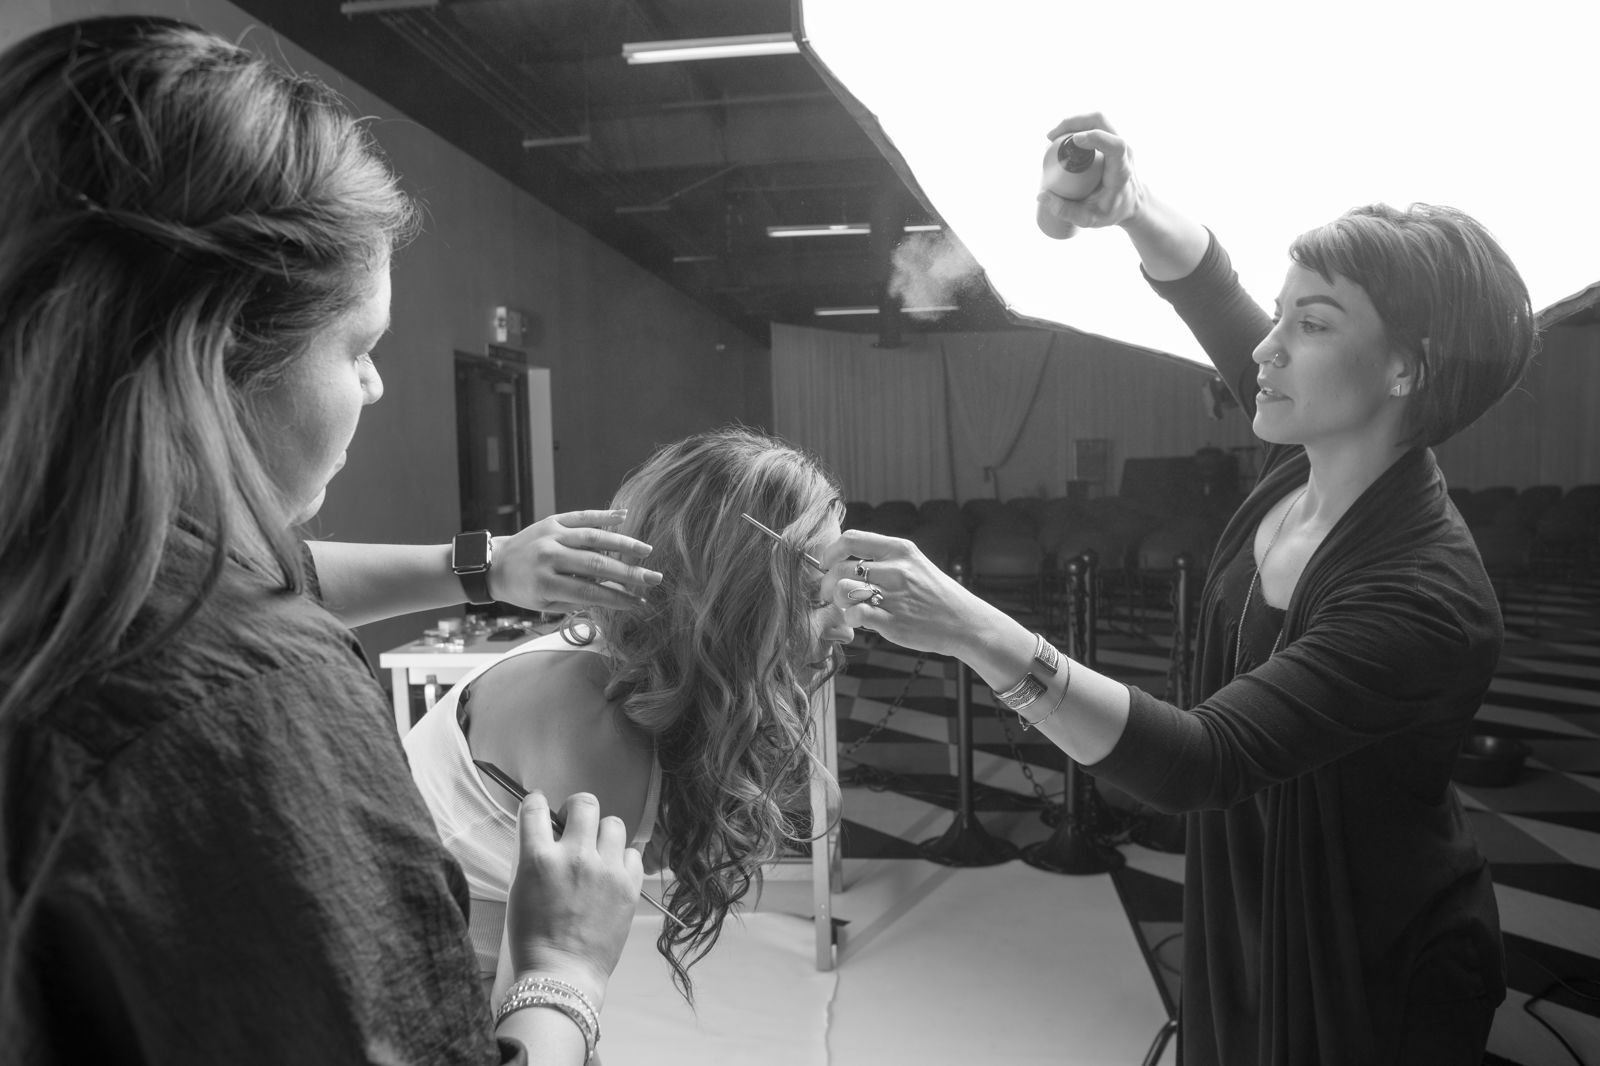 Prepping for the photo shoot, using lots of hairspray!